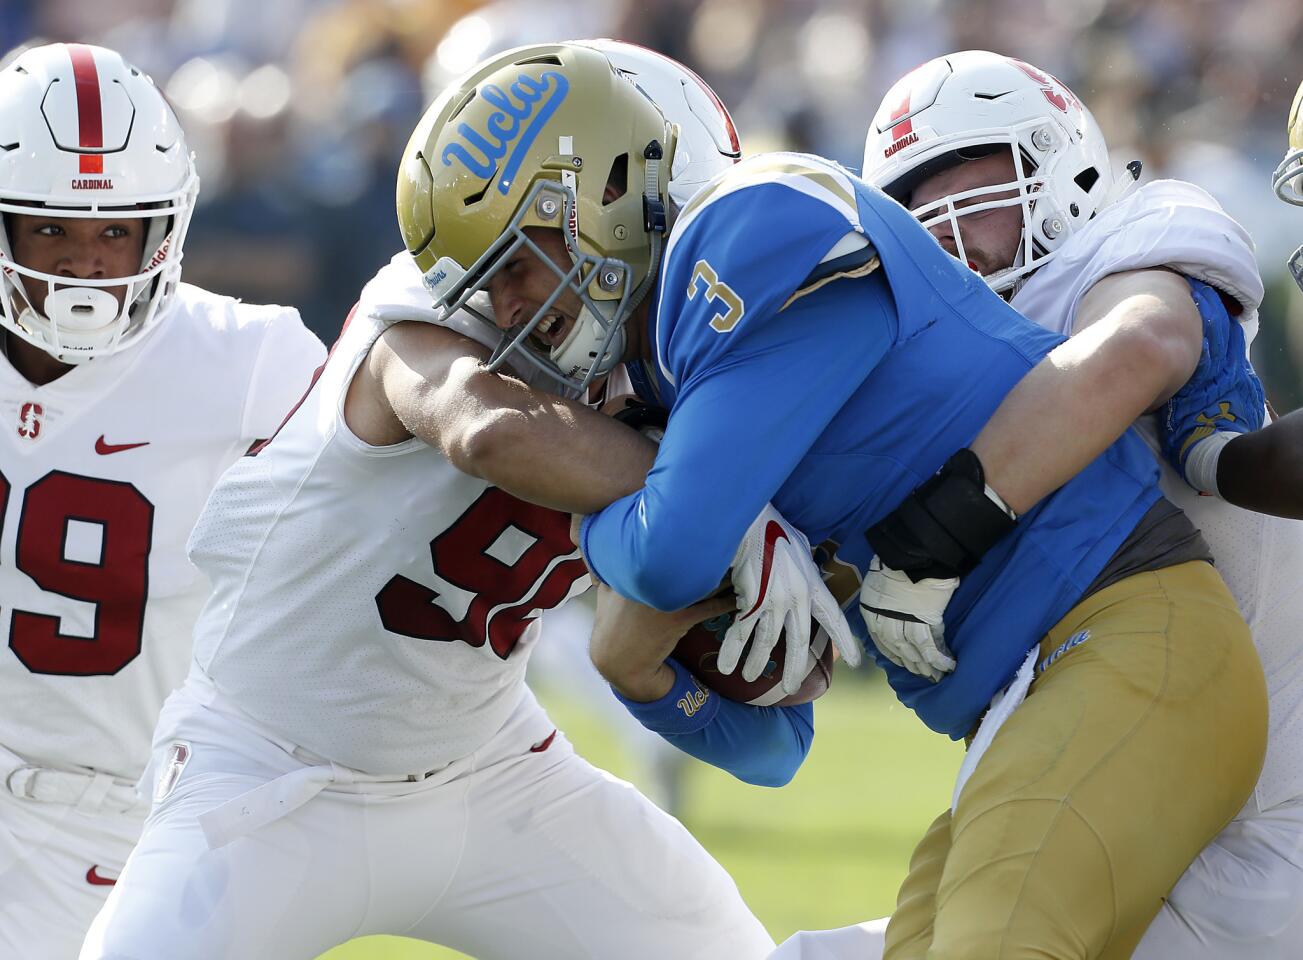 UCLA quarterback Wilton Speight fights for extra yardage against Stanford in the second quarter.